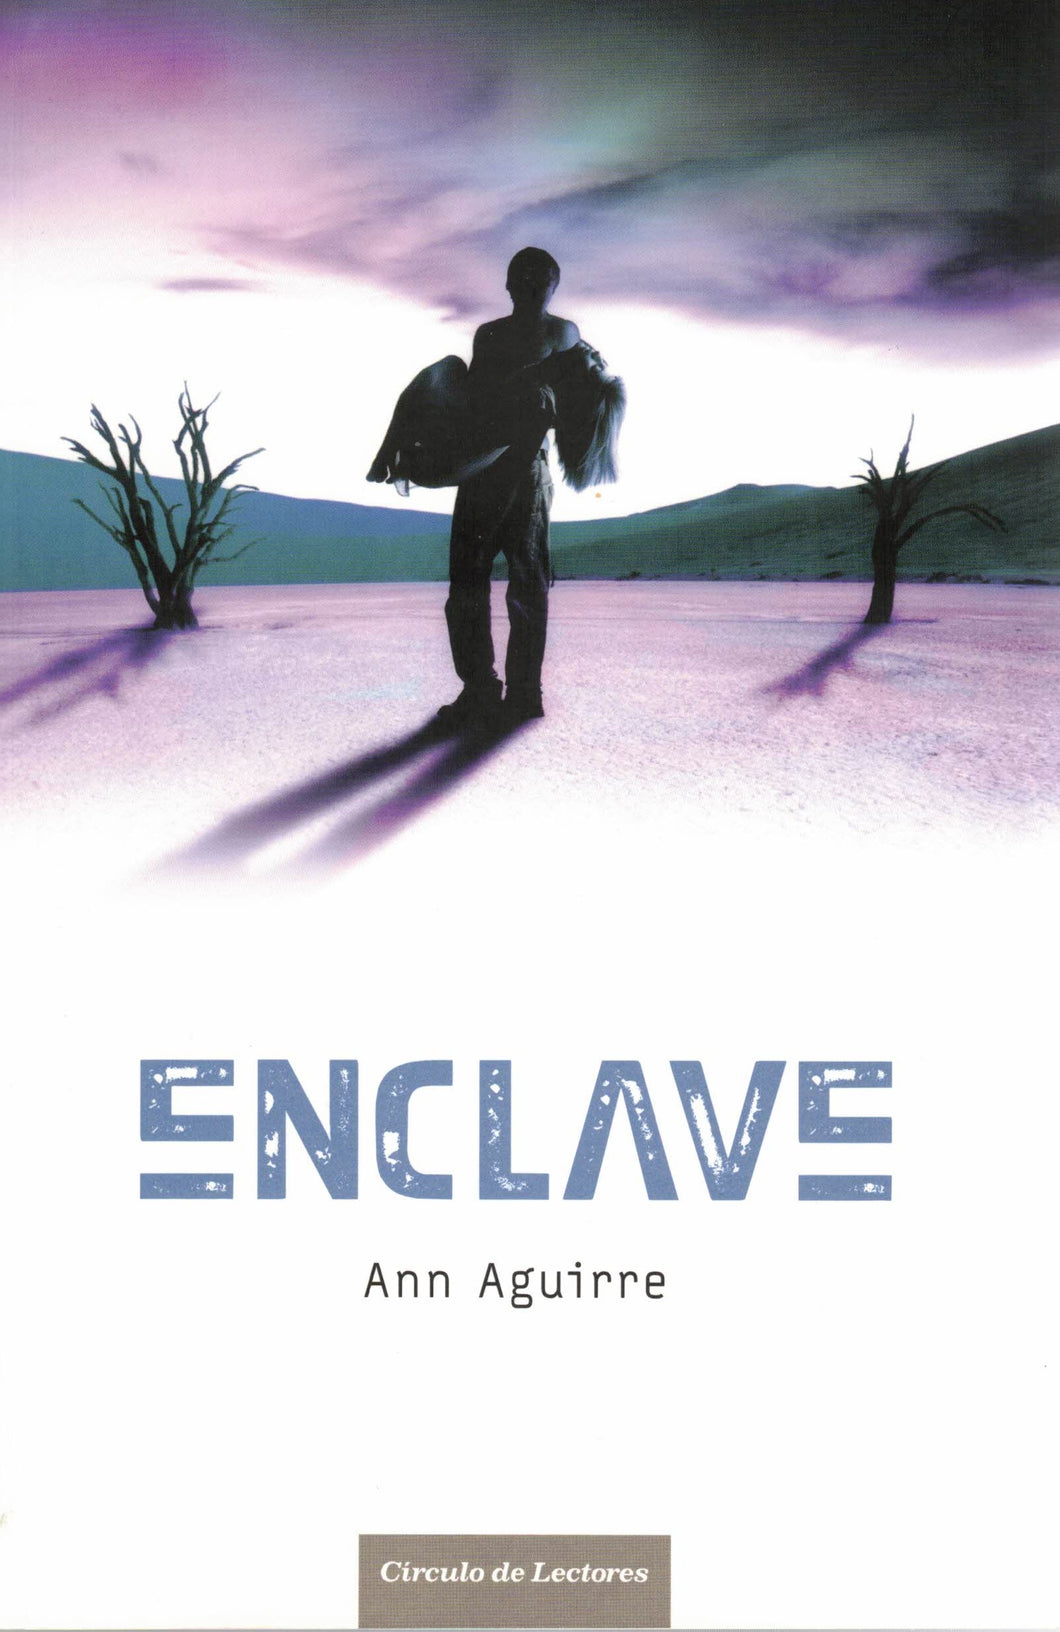 Enclave - ANN AGUIRRE - C-155 (book, paperback) (very good second hand)